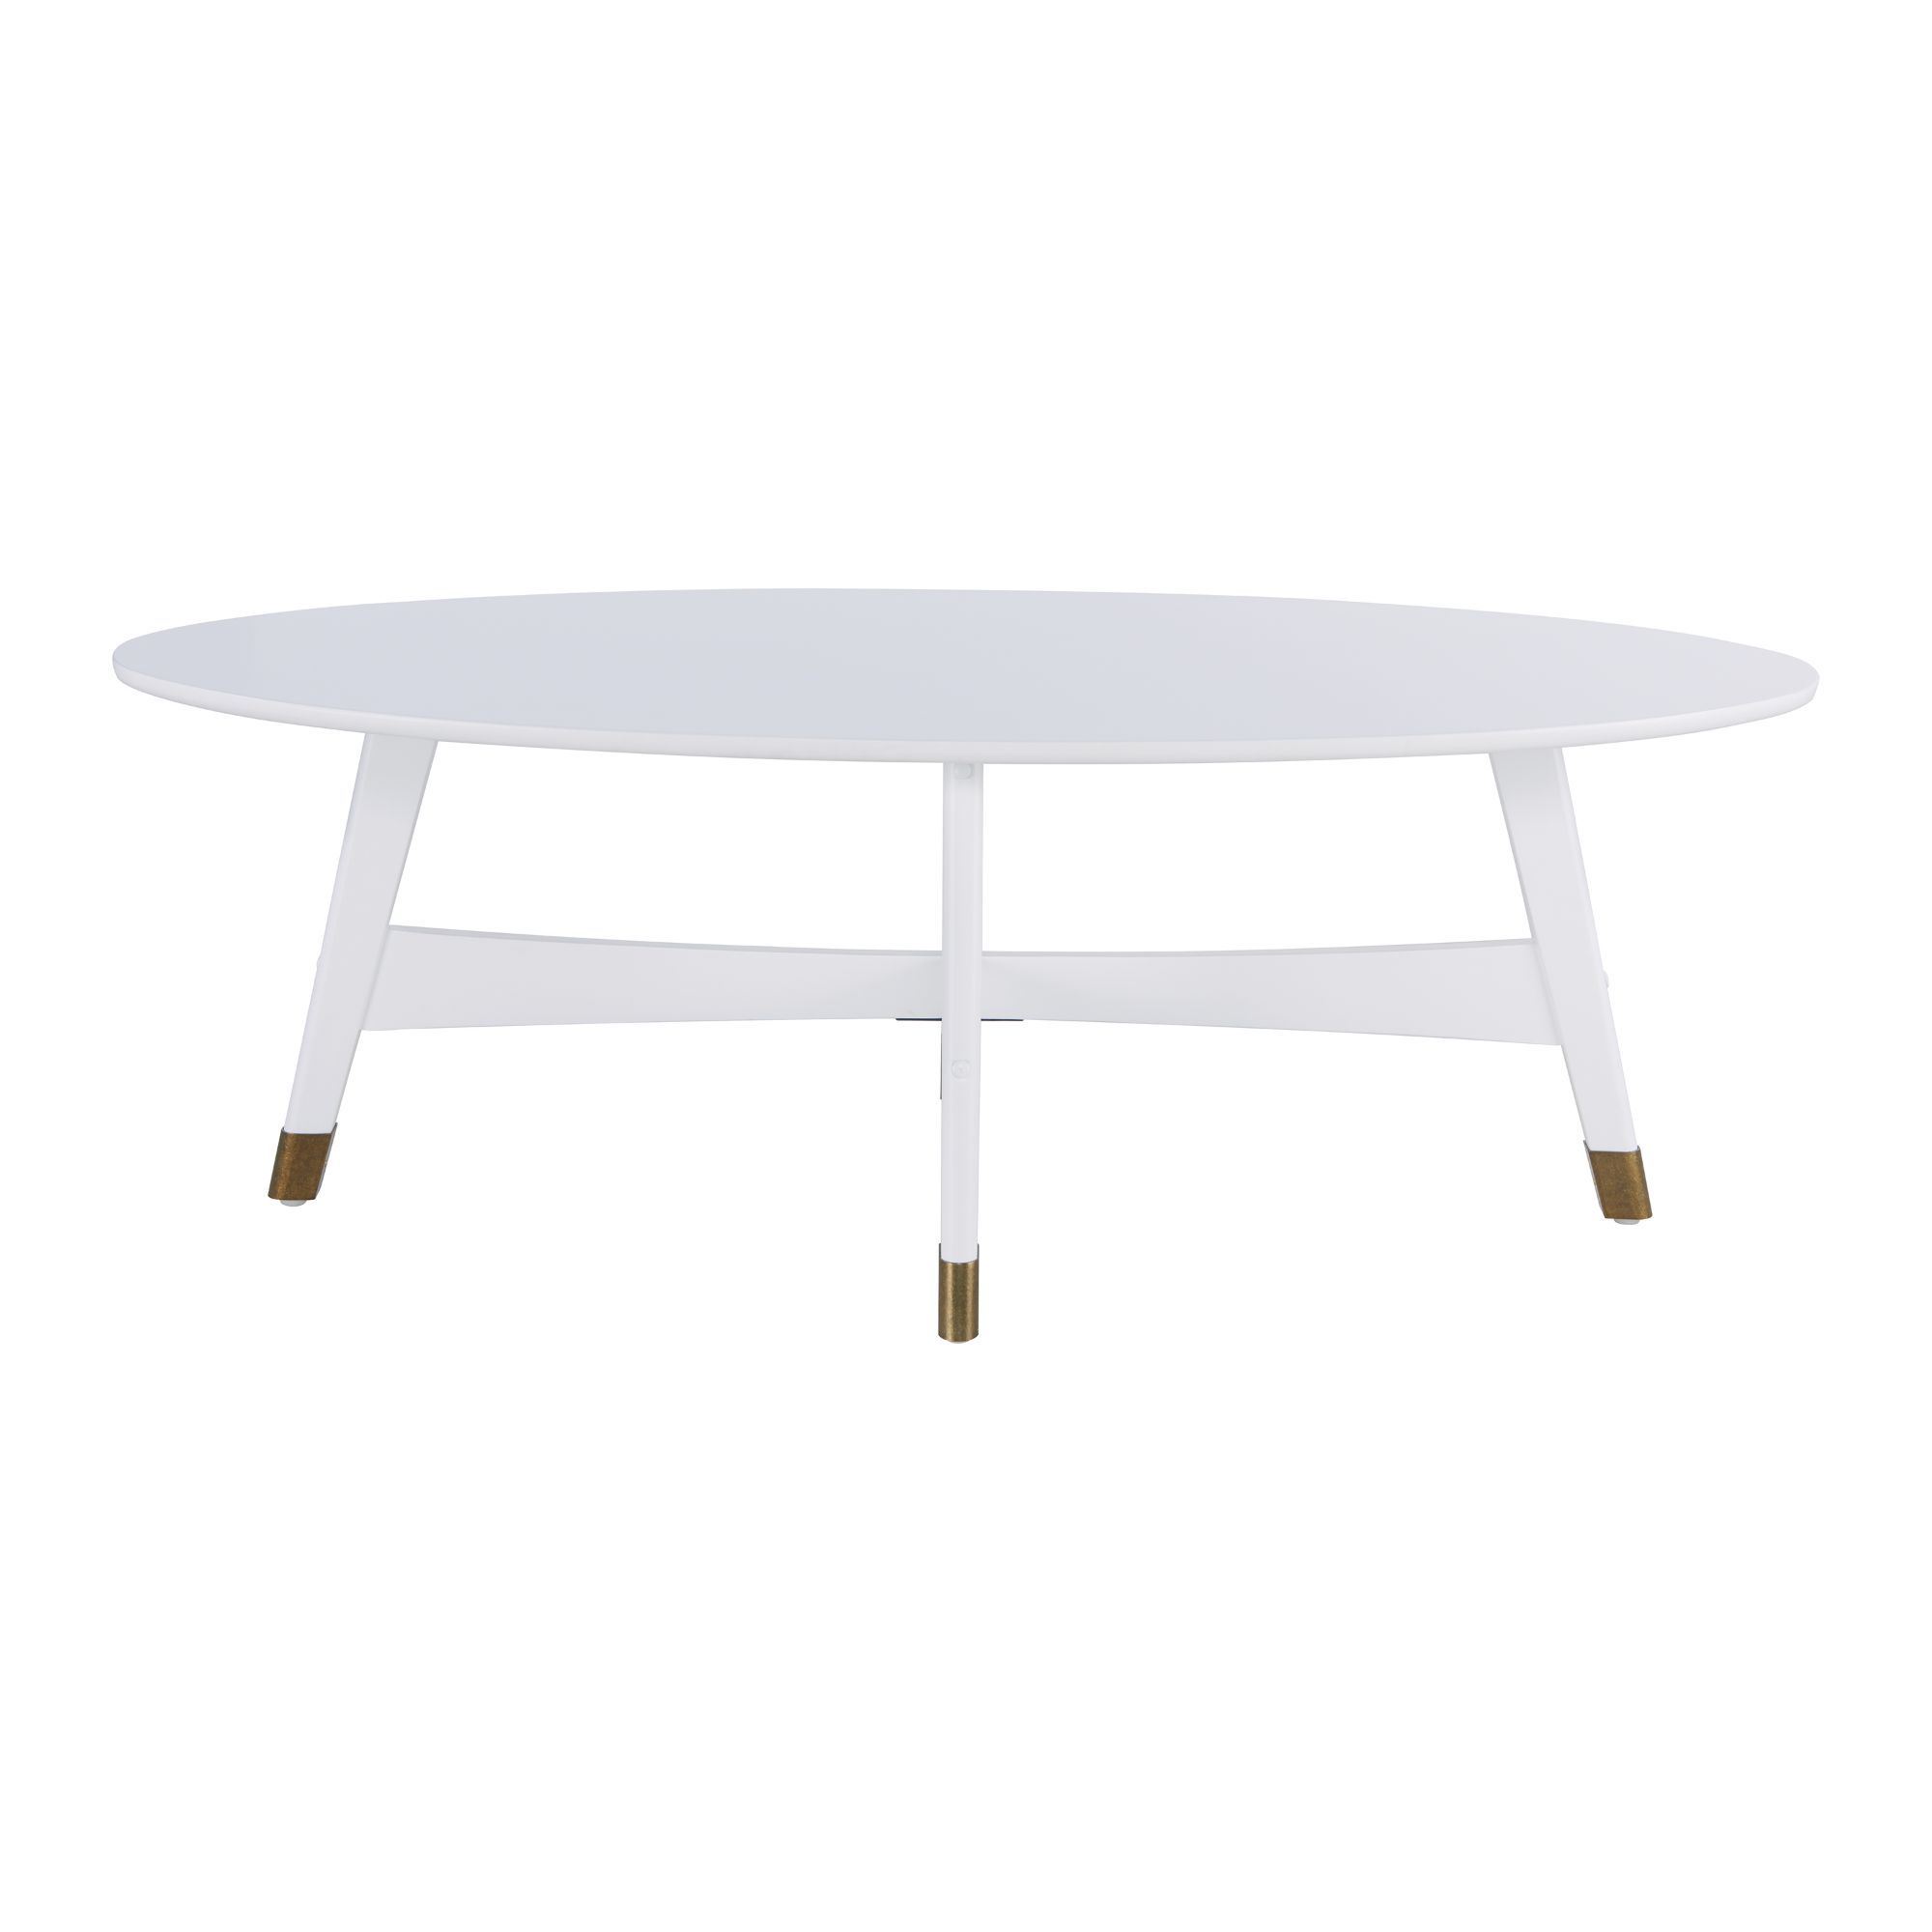 52" White And Gold Solid Oval Cocktail Table With Metal For Gold Cocktail Tables (View 9 of 15)